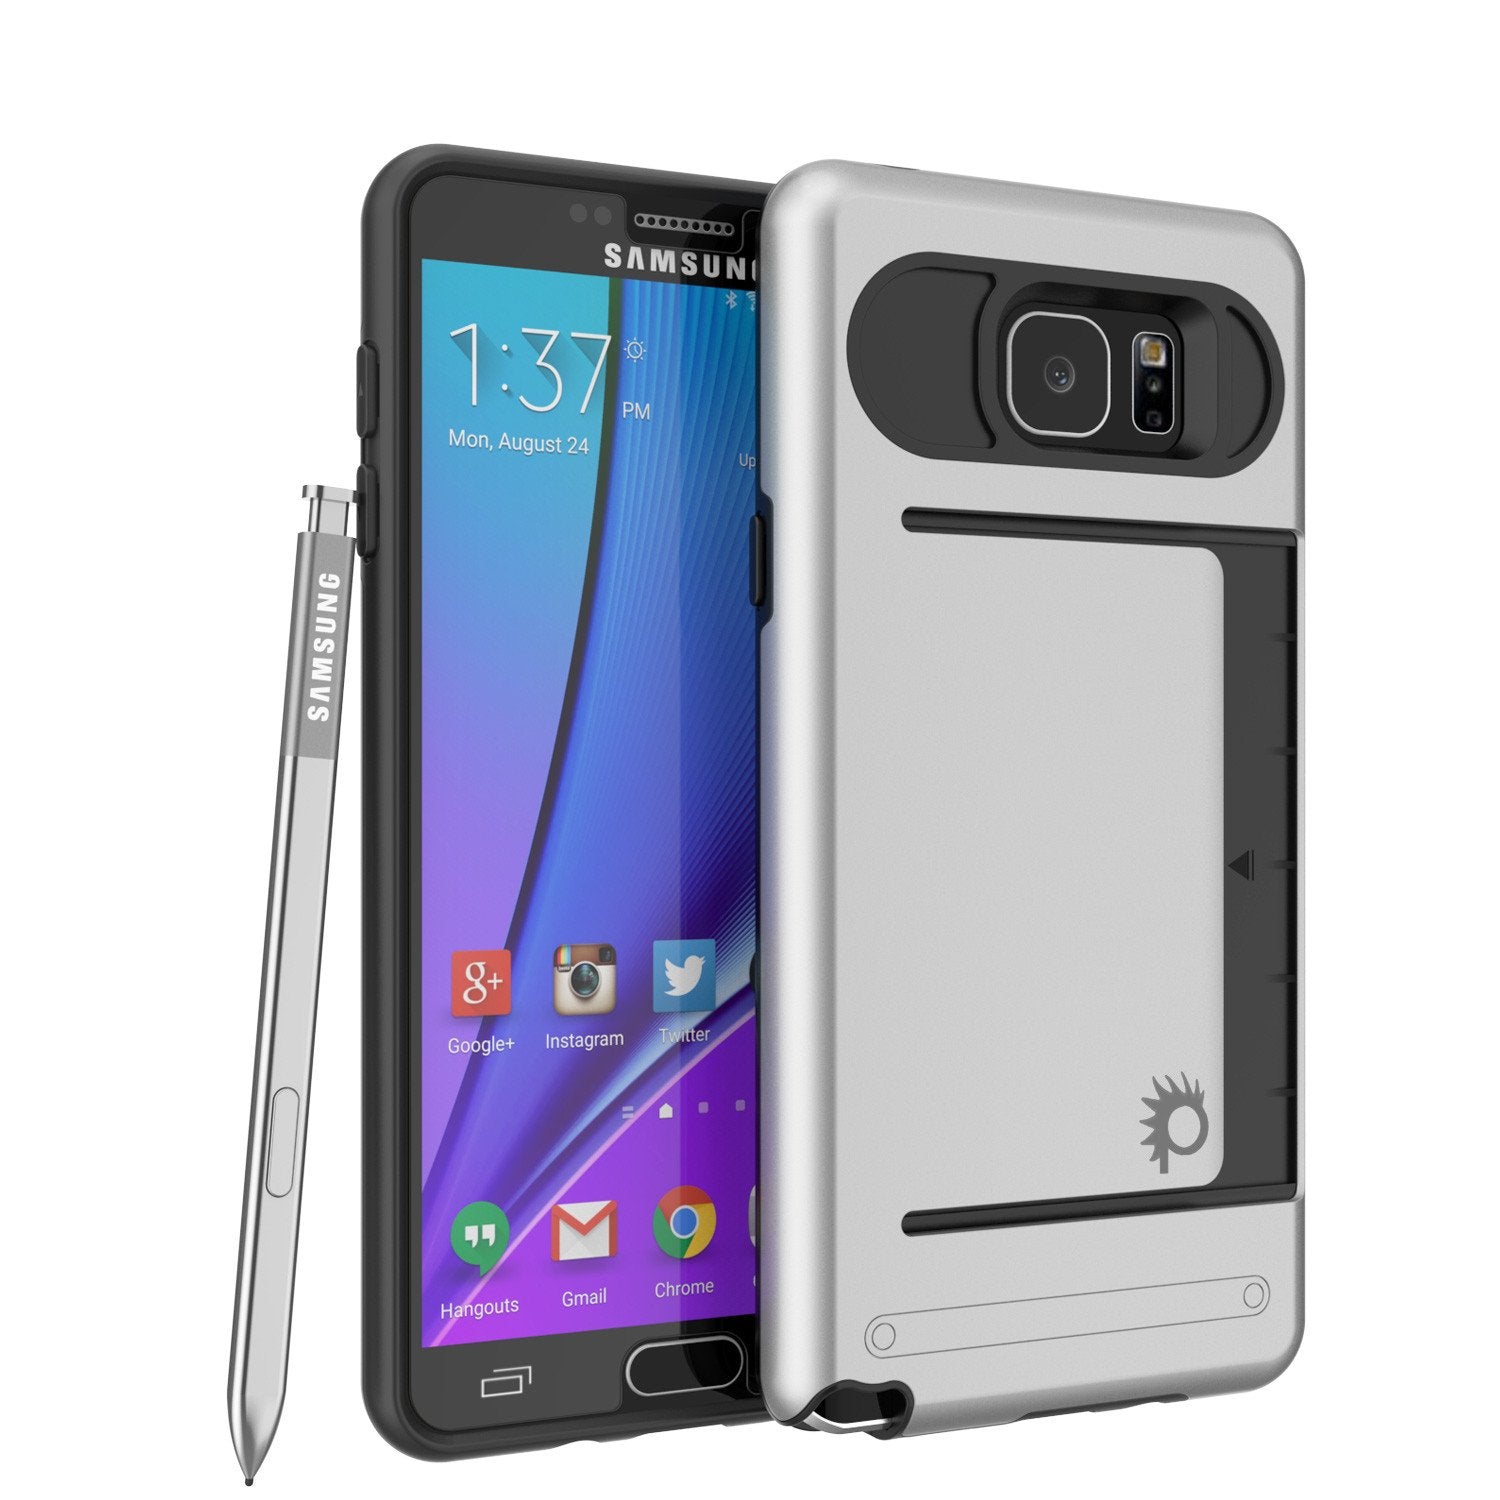 Galaxy Note 5 Case PunkCase CLUTCH Silver Series Slim Armor Soft Cover Case w/ Tempered Glass